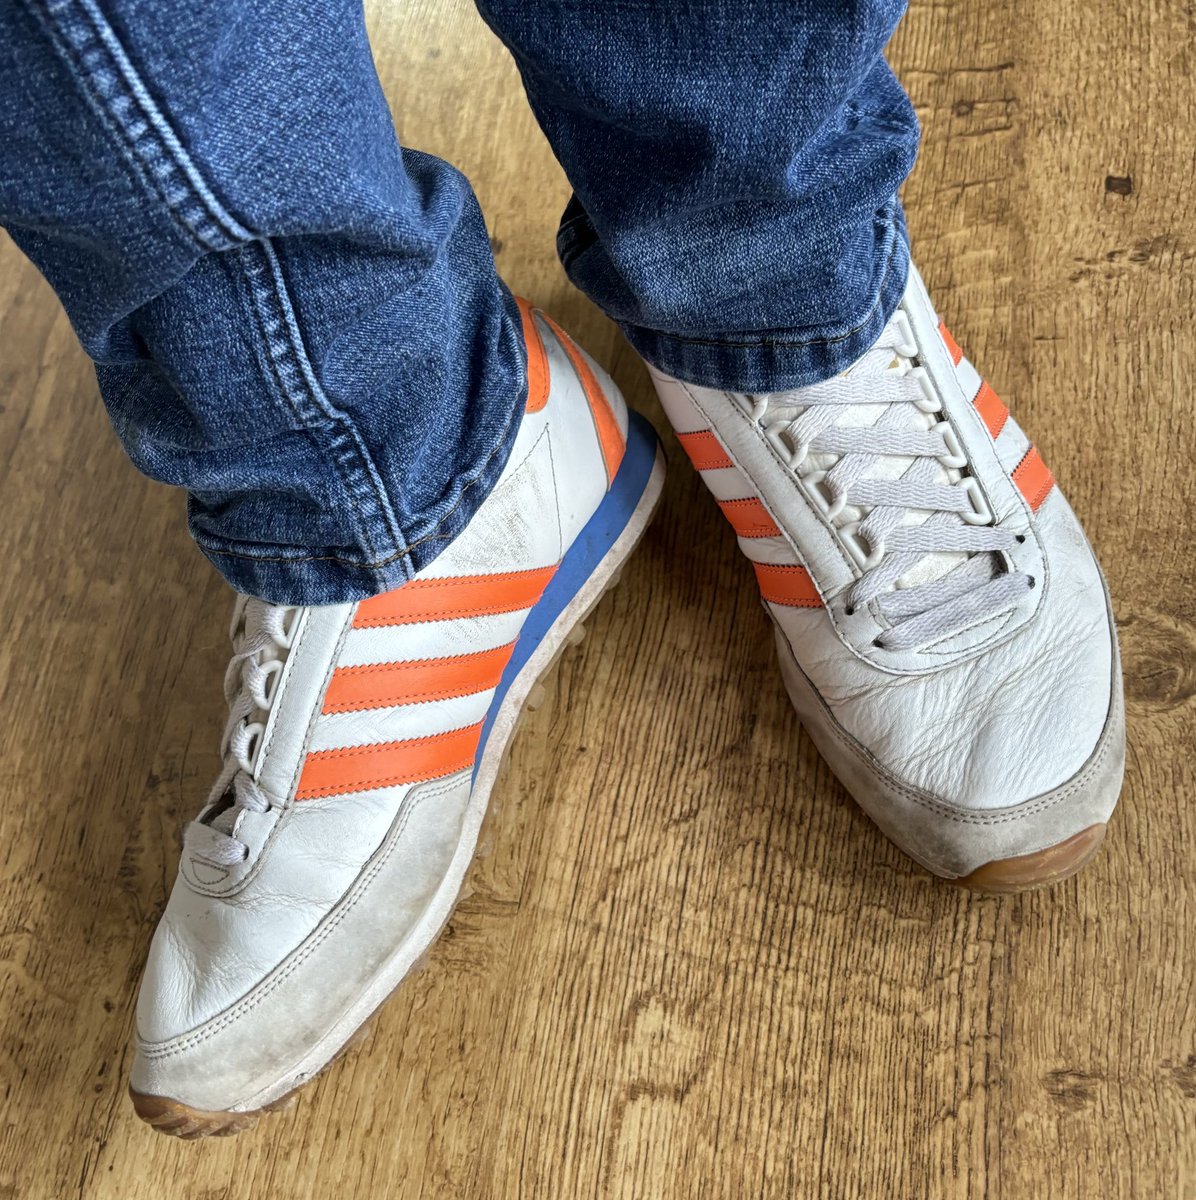 Today’s choice for a spot of D.I.Y. 
Night Joggers on foot… #ShareYourStripes ///